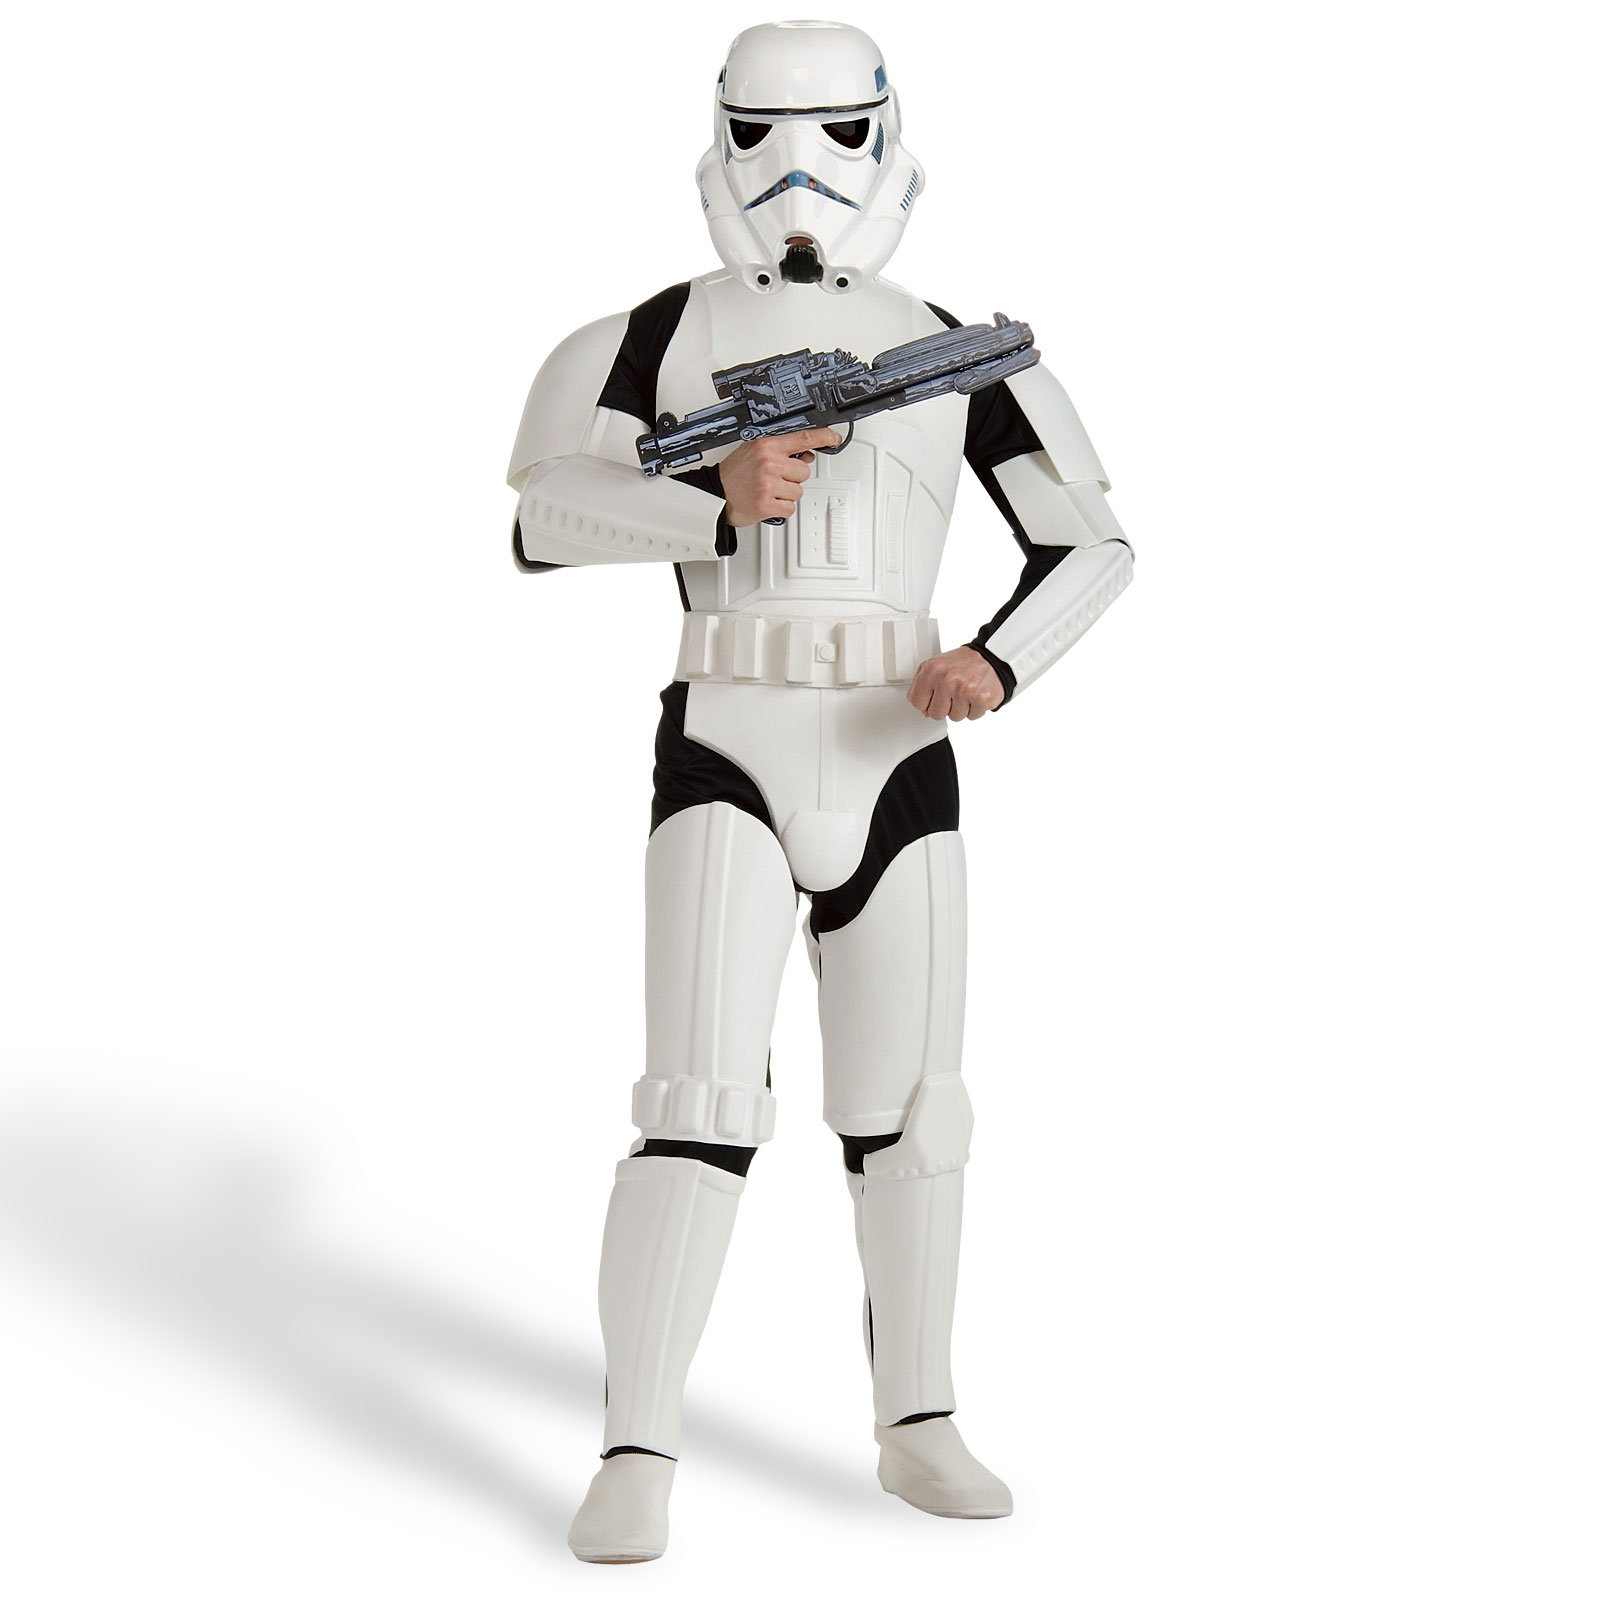 Star Wars - Stormtrooper costume for adults